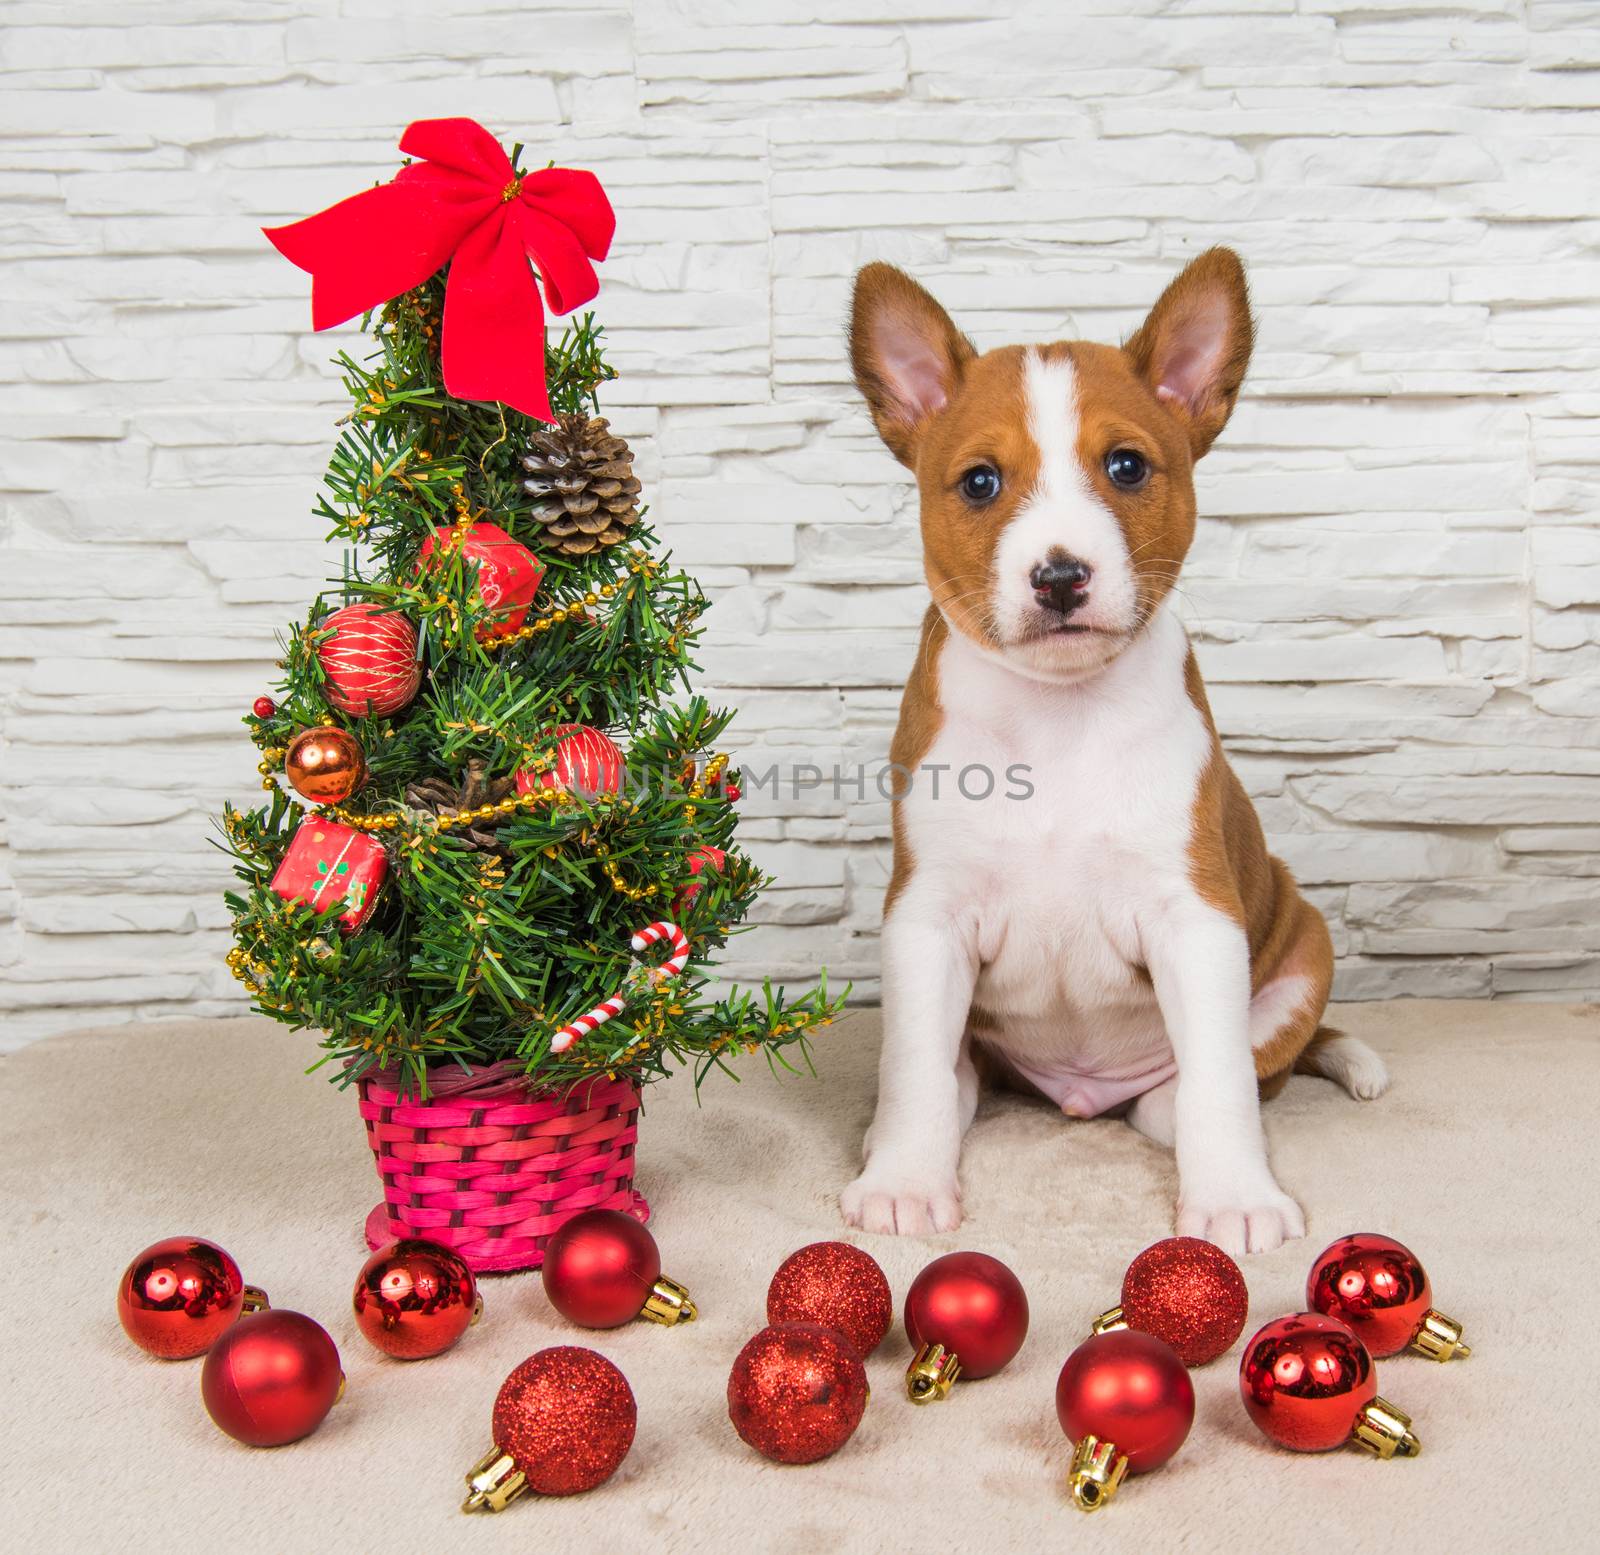 Funny Basenji puppy dog with New Year, Christmas tree with gifts by infinityyy